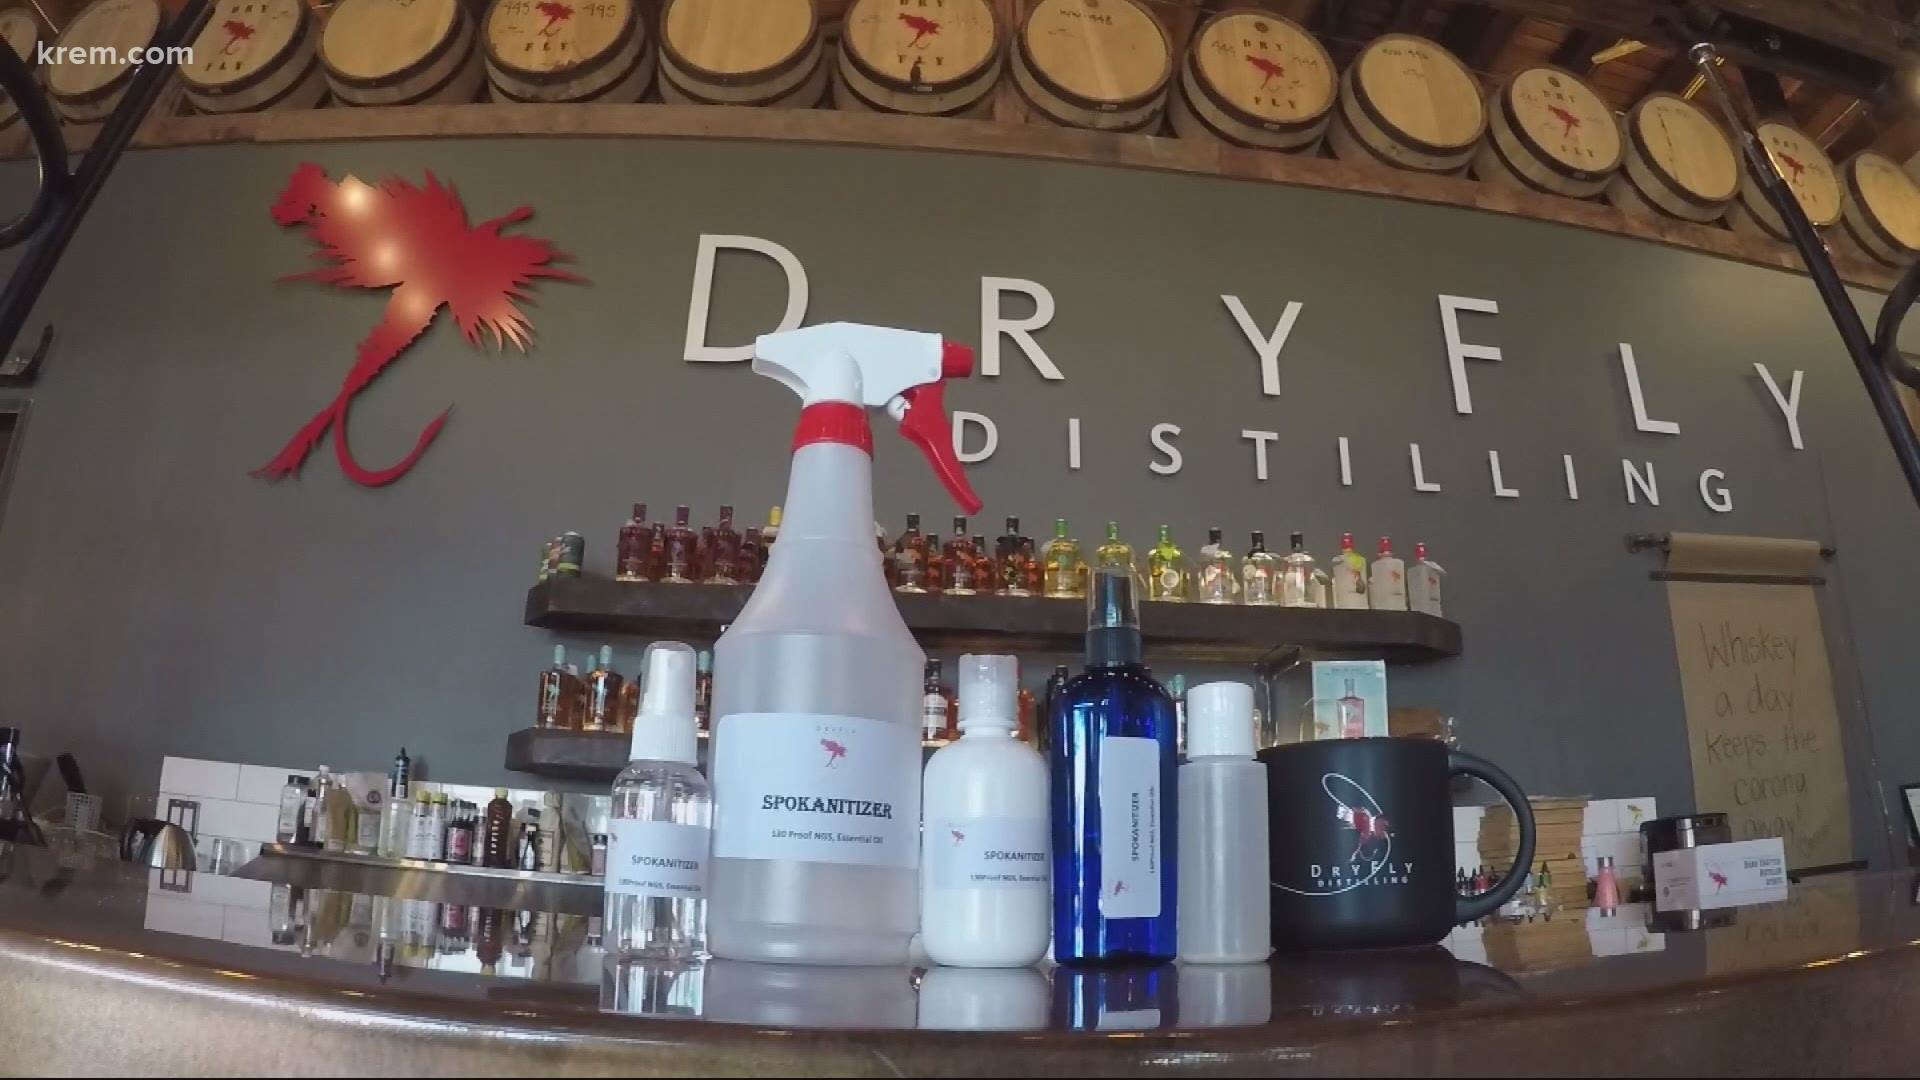 Dry Fly Distillery in Spokane was initially told they would have to pay over $14,000 for making what's considered an over-the-counter drug.